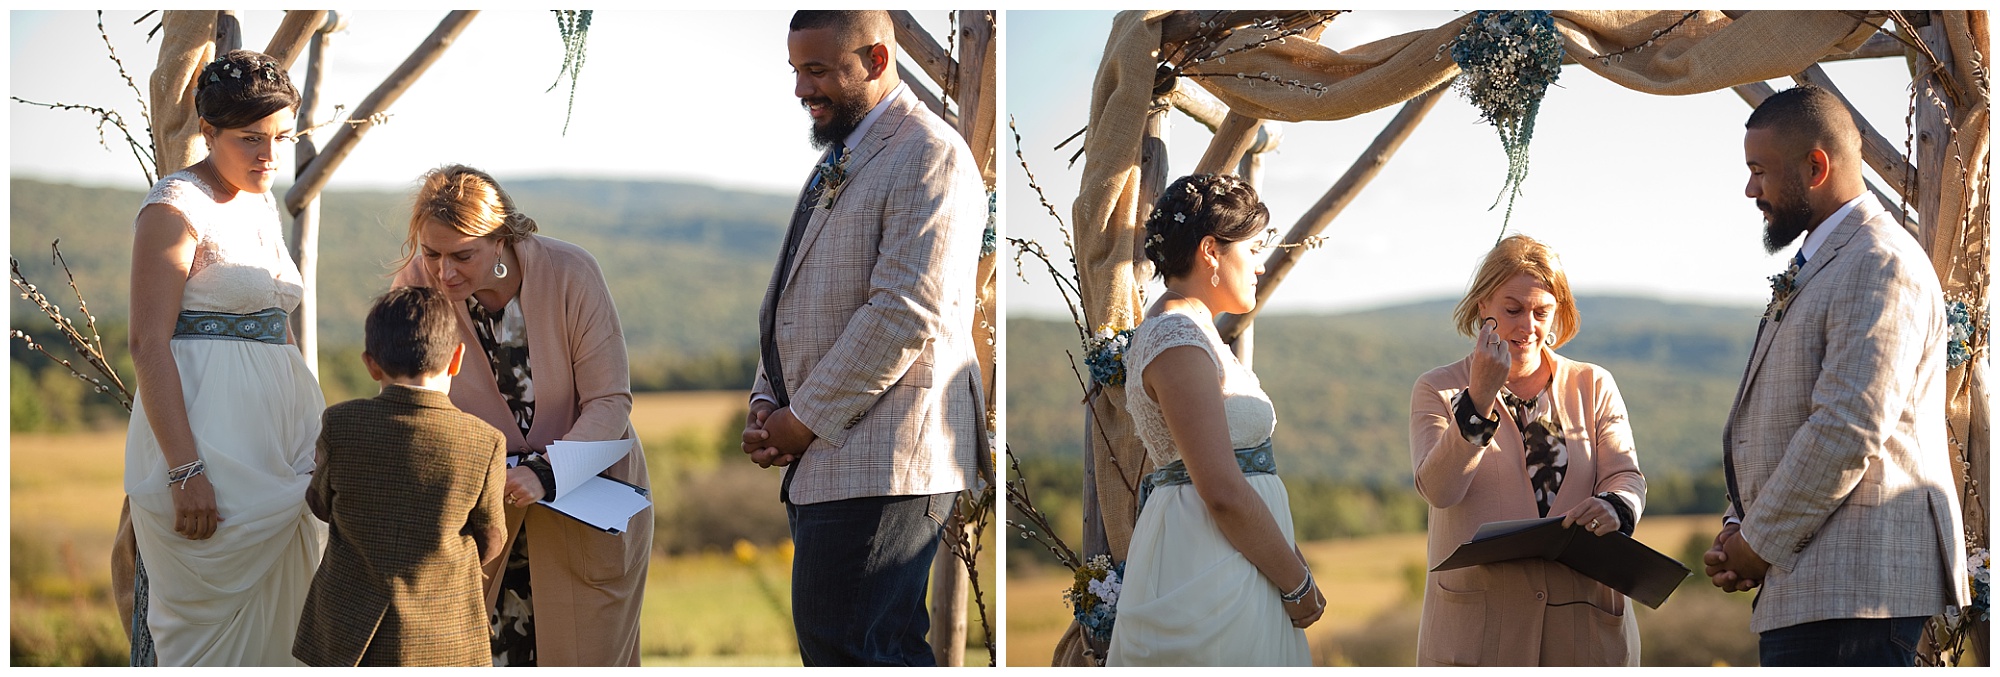 Bride and groom exchanging ring against the backdrop of late afternoon sun-drenched rolling hills.